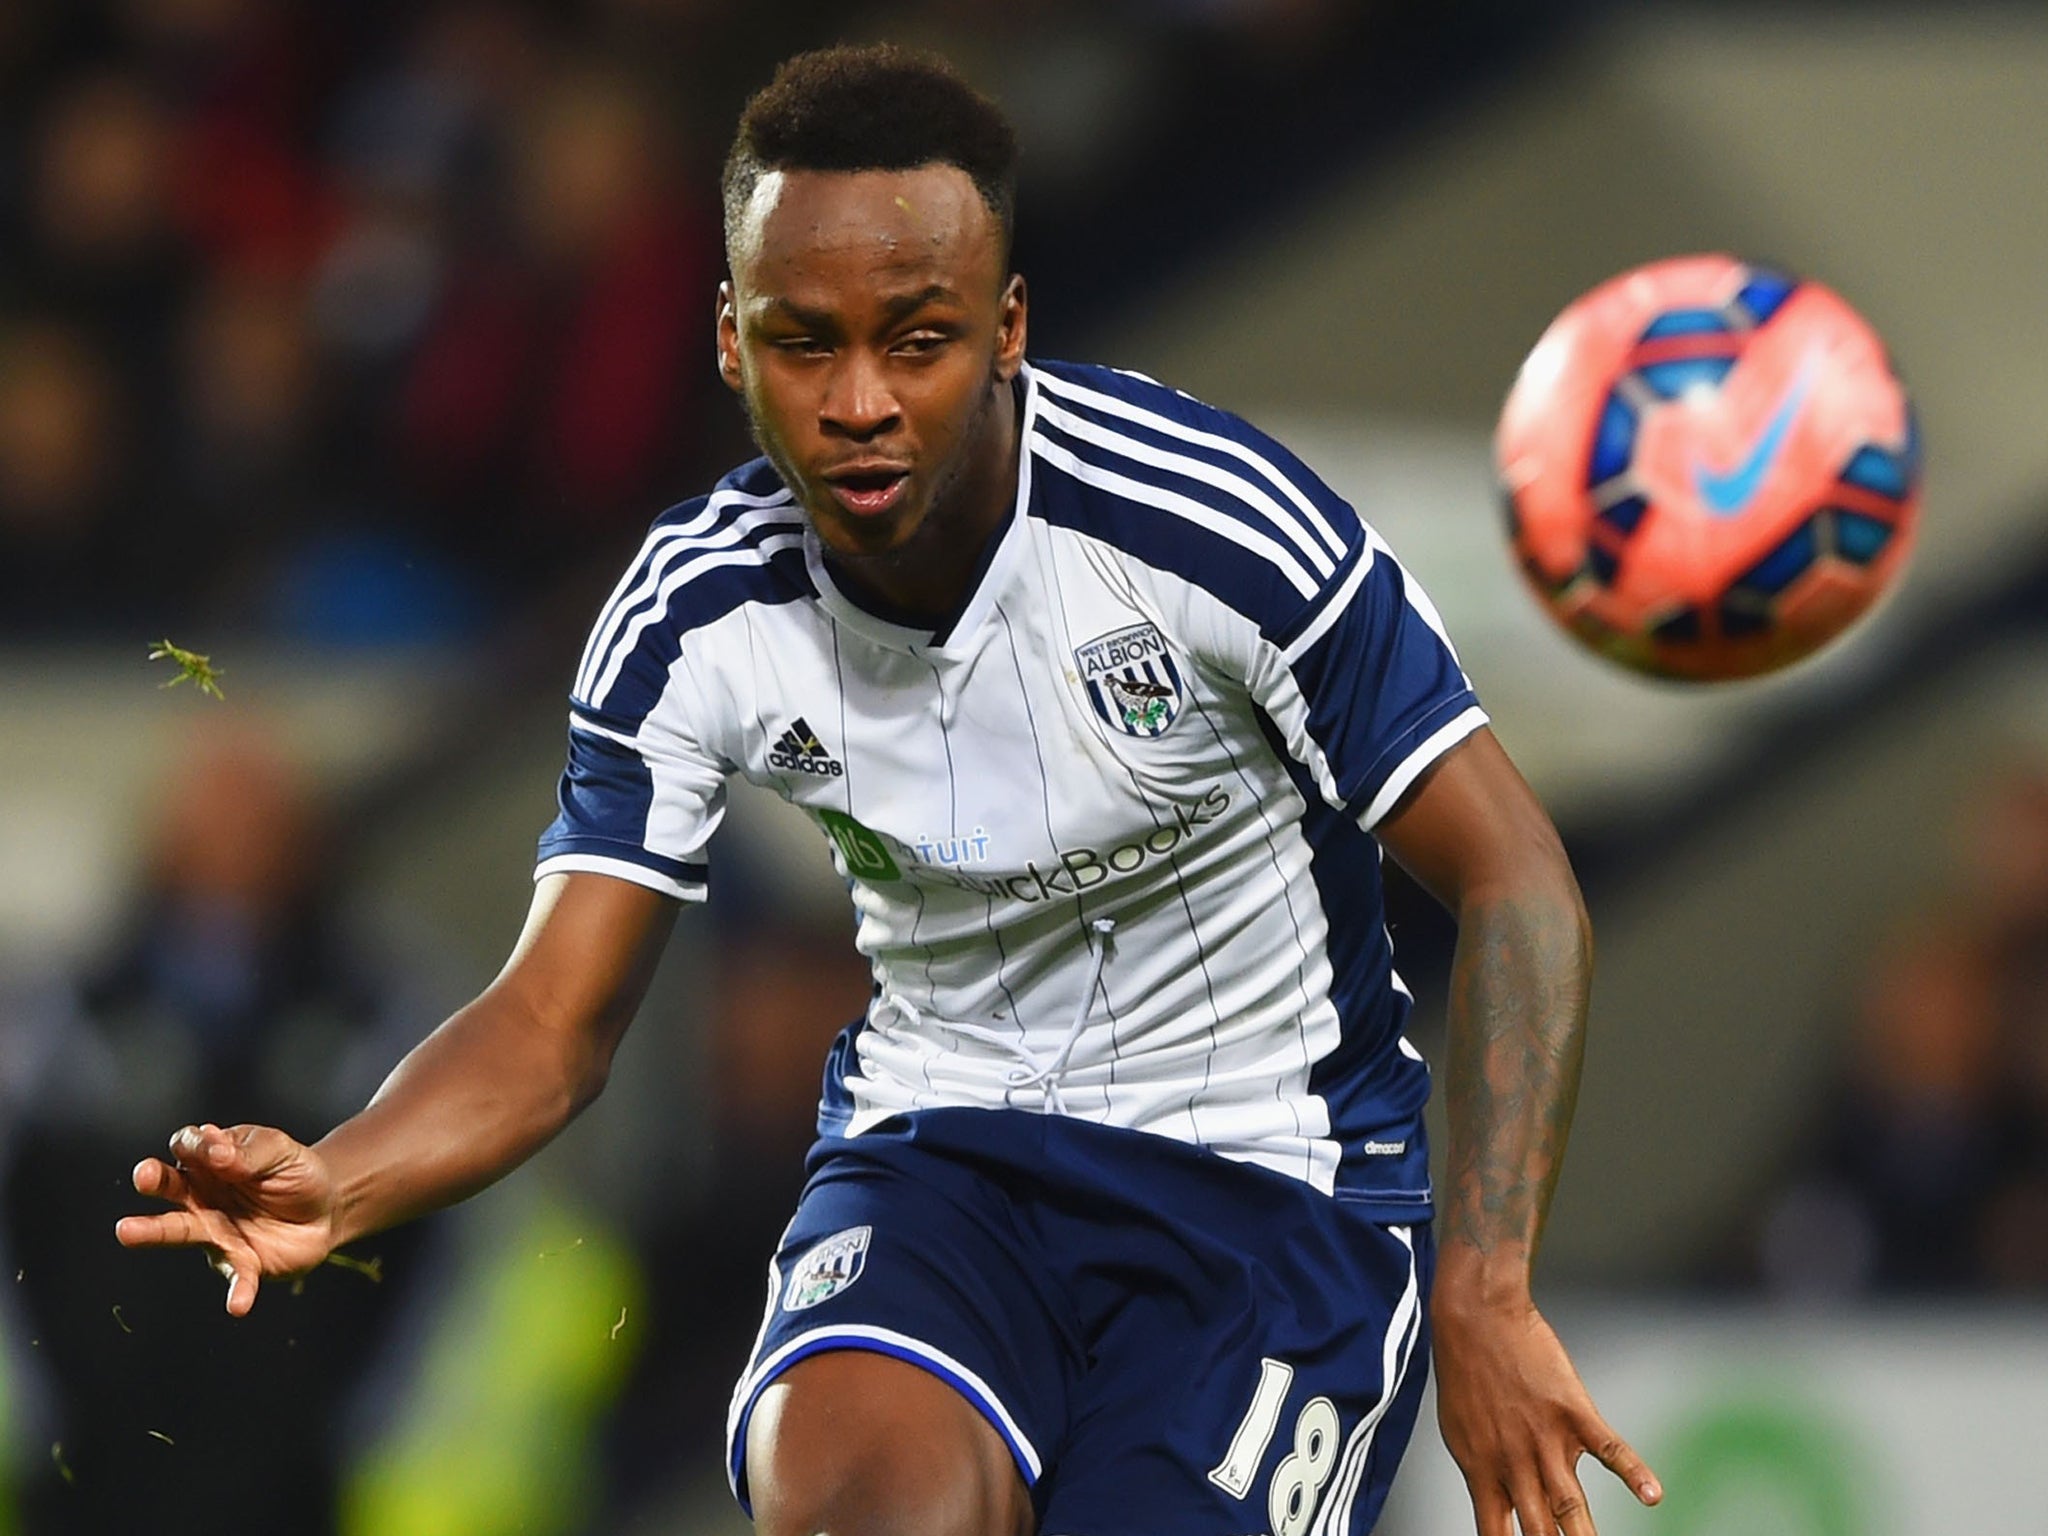 Tony Pulis made a point of suggesting that striker Saido Berahino is the type of player who you can build a team around